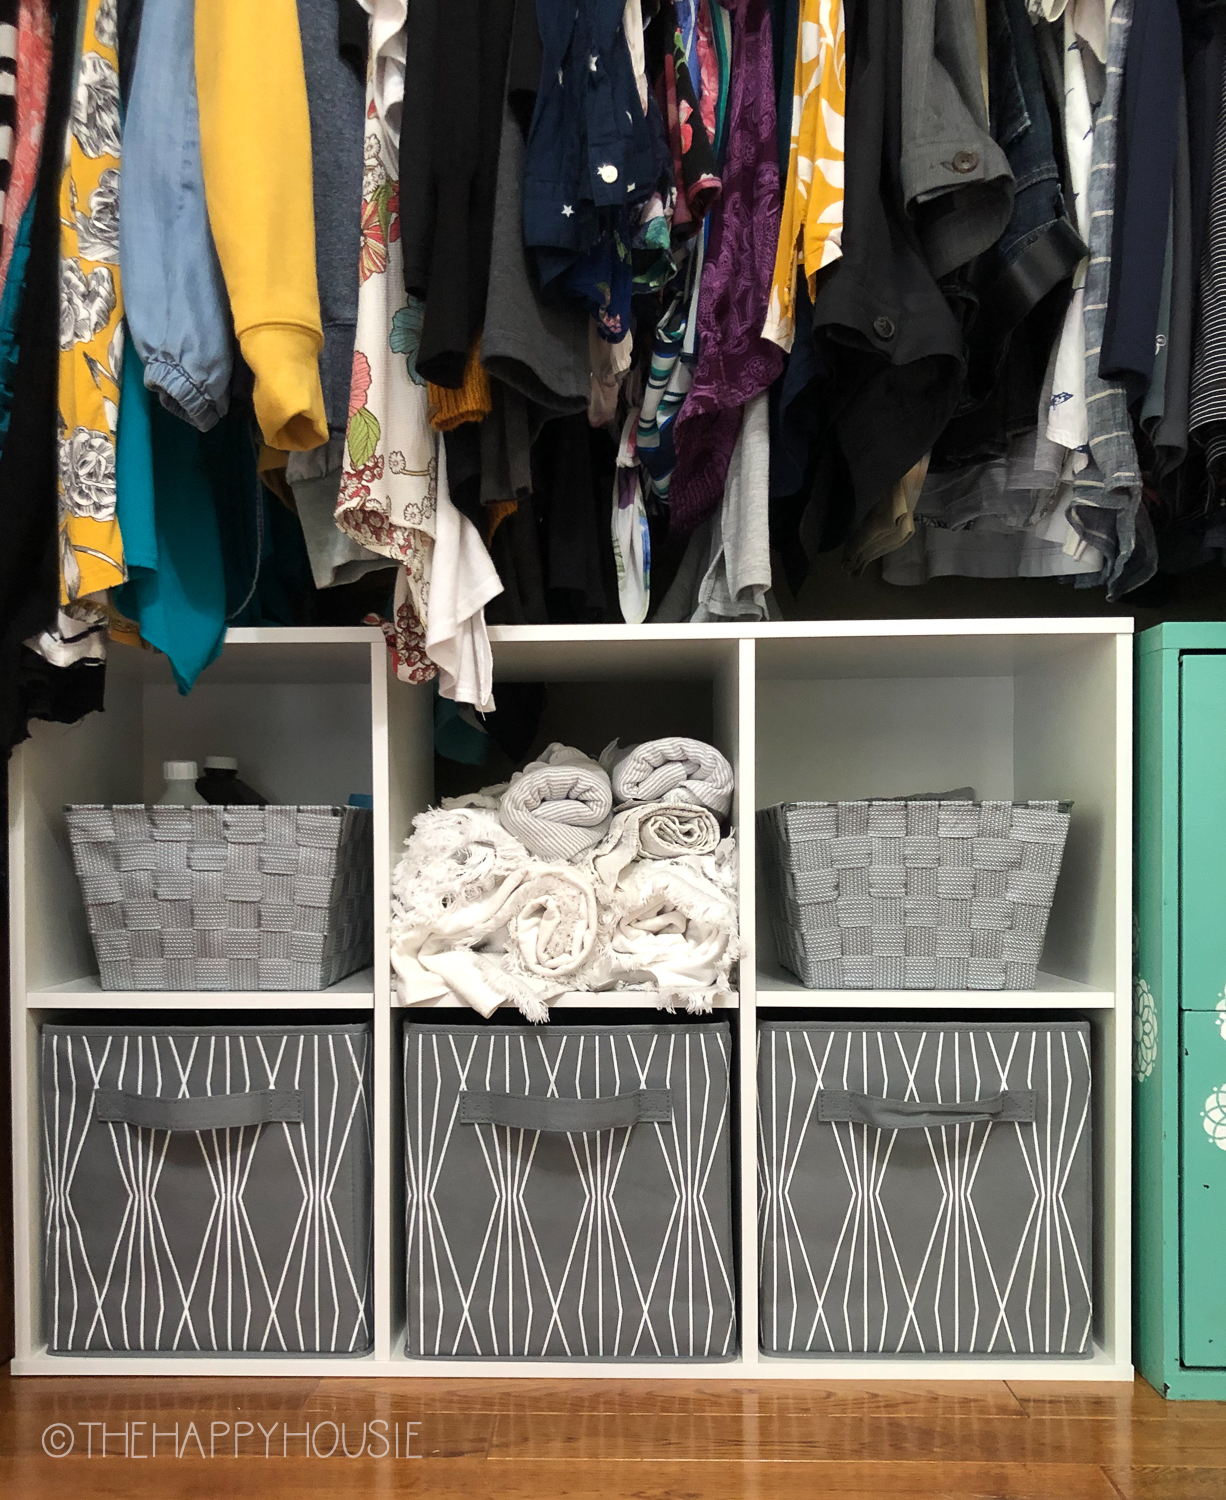 https://www.thehappyhousie.com/wp-content/uploads/2020/08/how-to-organize-a-small-reach-in-closet-for-multi-purpose-storage-4.jpg